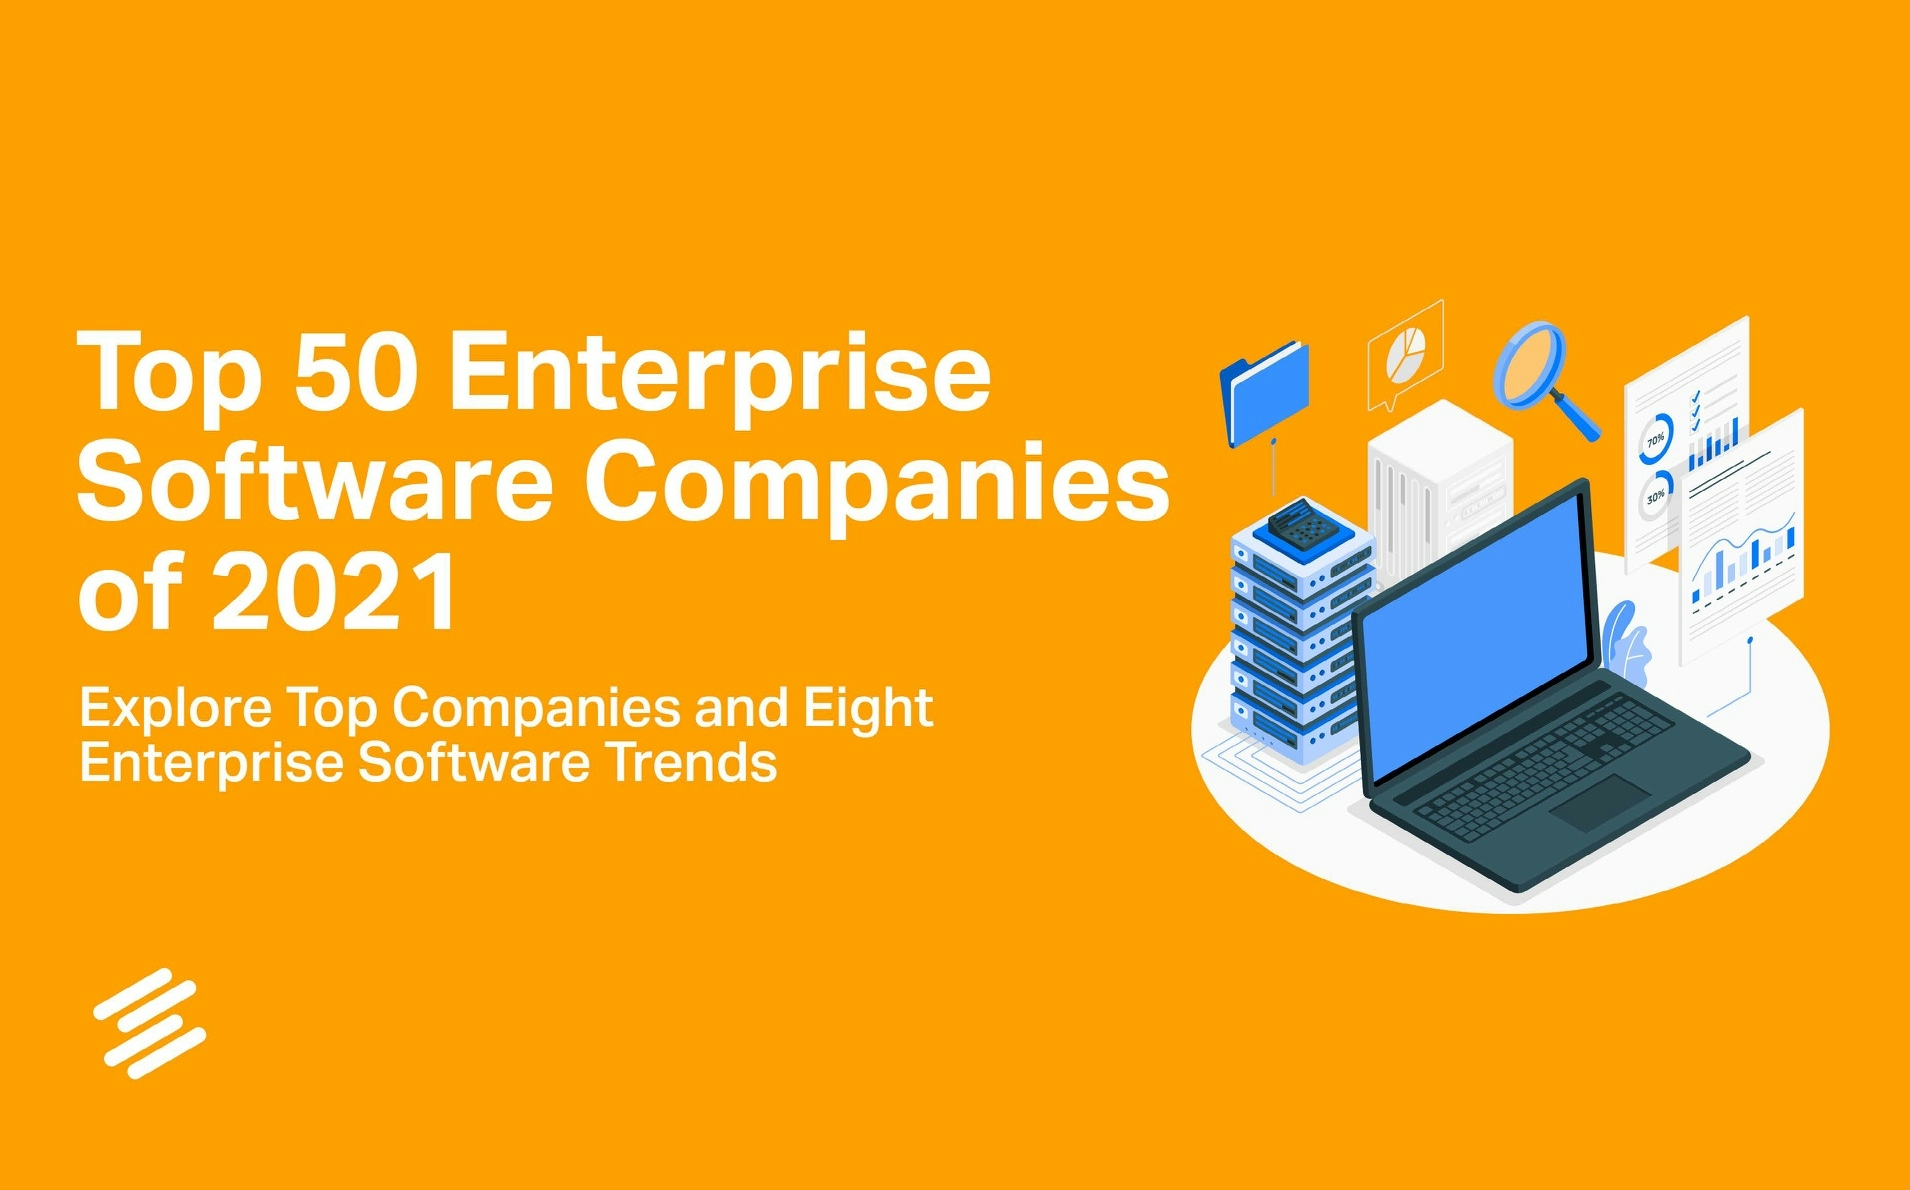 Top 50 Privately-Held Enterprise Software Companies